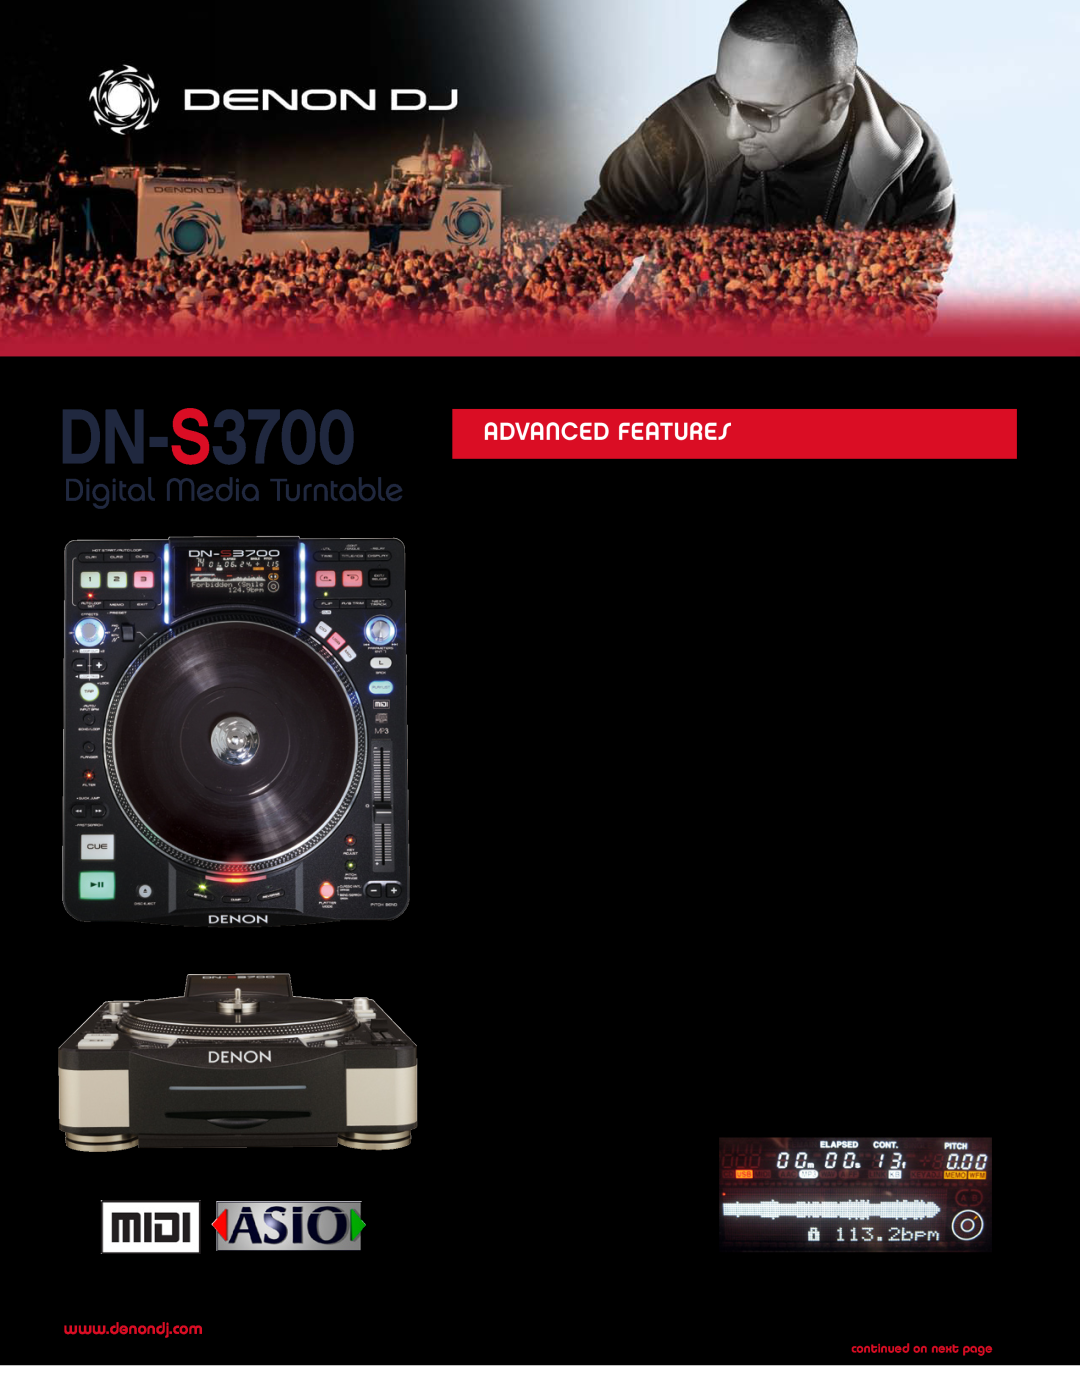 Denon DJ DN-S3700 specifications Digital Media Turntable, Advanced Features, continued on next page 